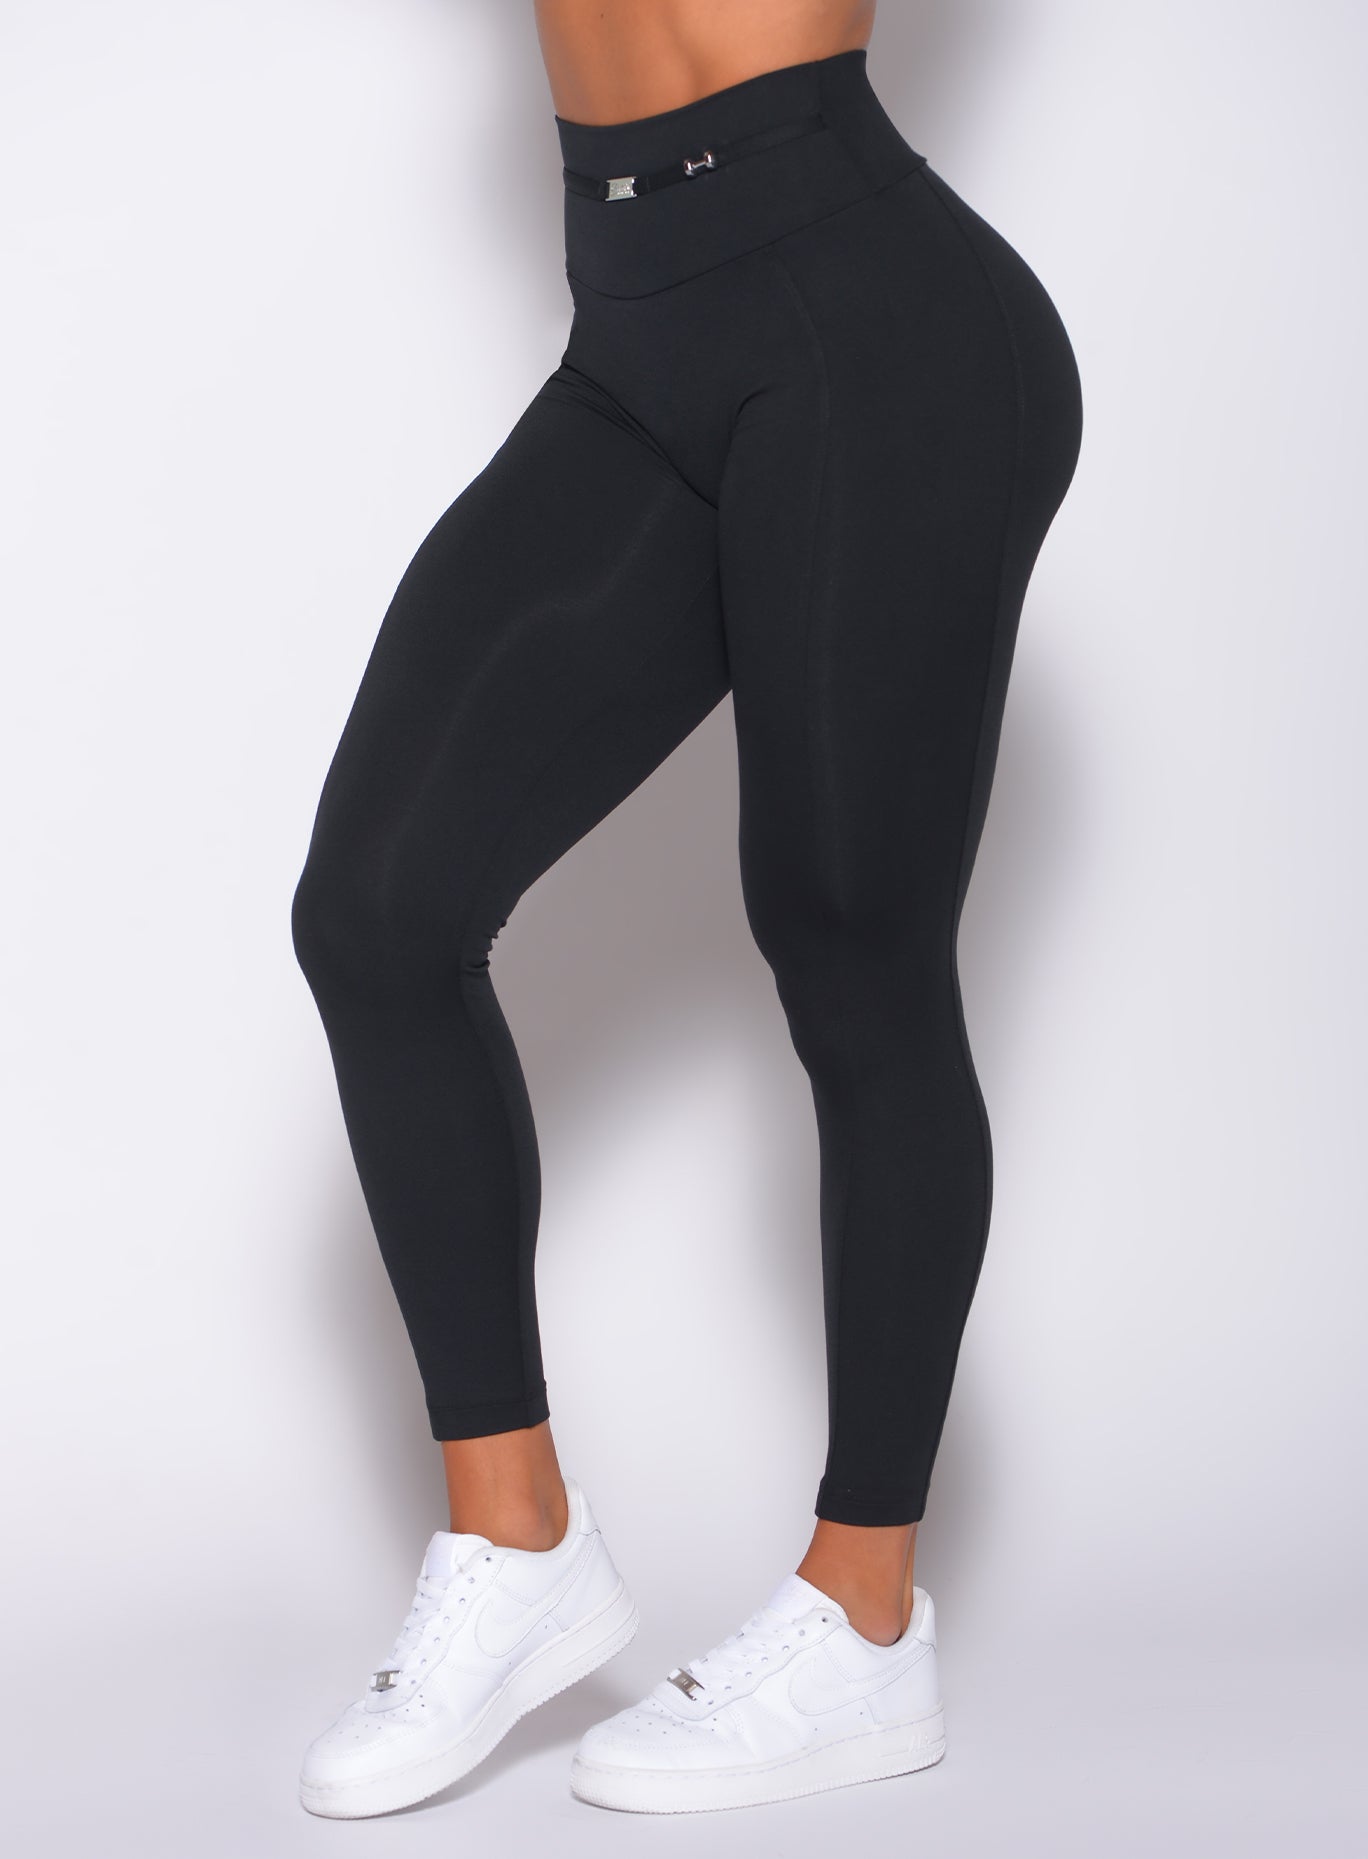 Zoomed in left side view of our black barbell leggings 